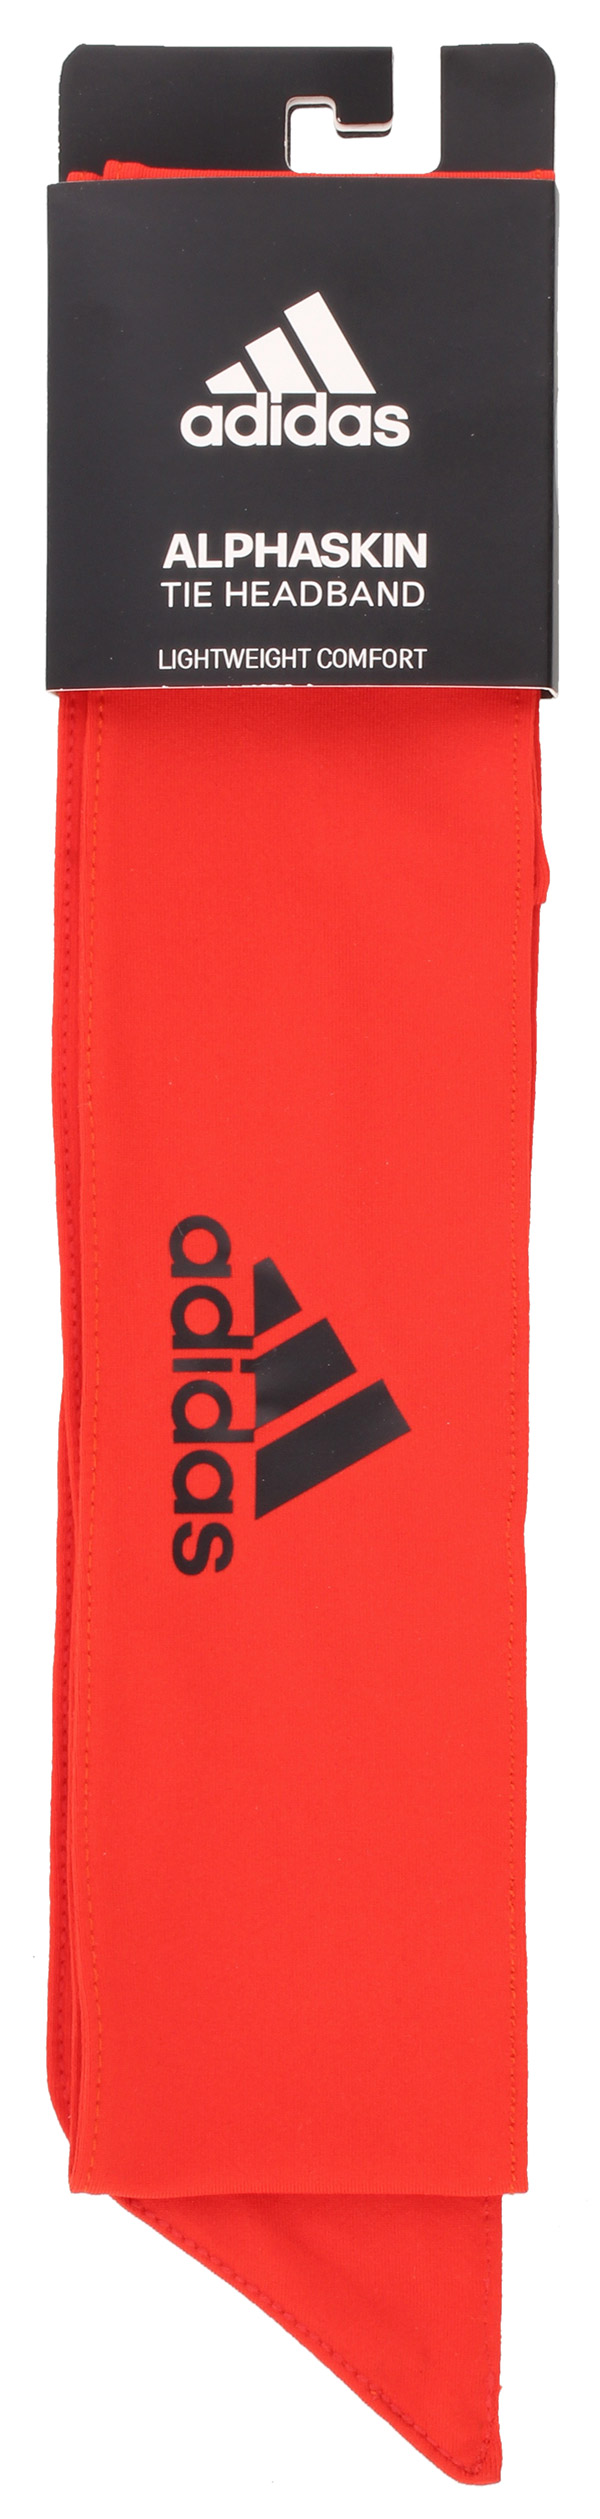 adidas Alphaskin Tie Headband (Red) - Breathable Fabric For Best Sports Performance